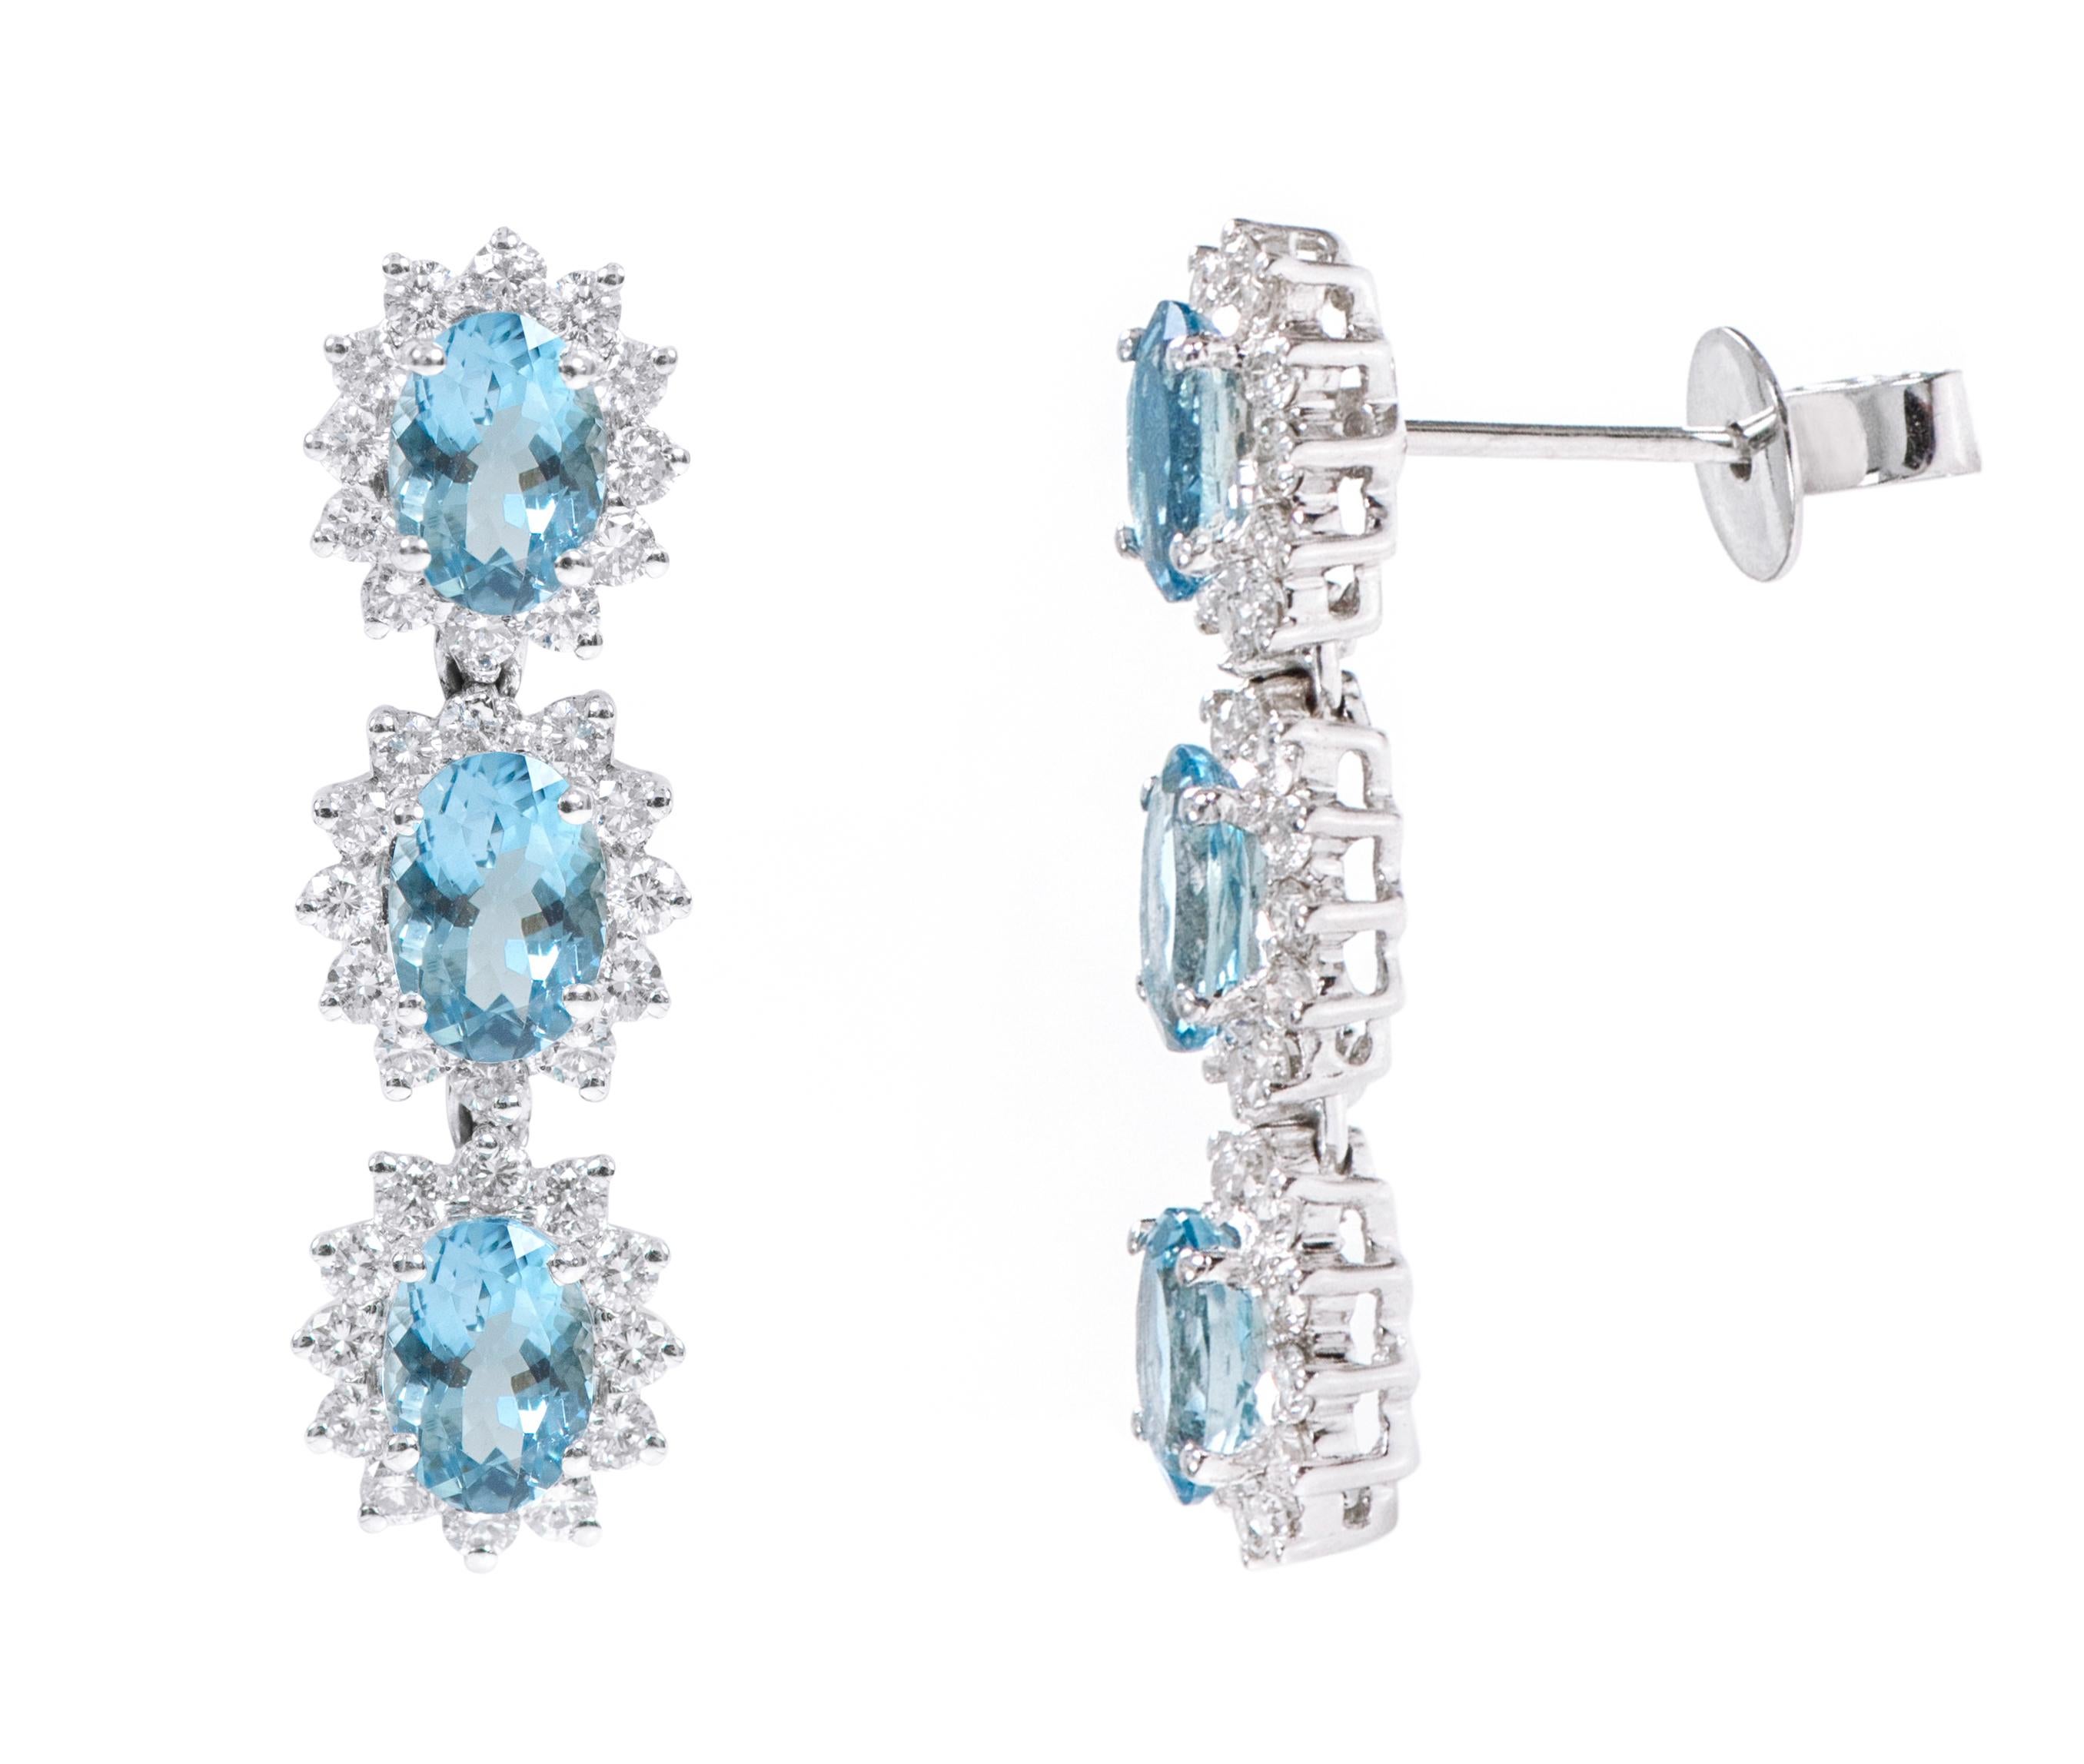 18 Karat White Gold 3.78 Carat Aquamarine and Diamond Cluster Dangle Earrings

This exemplary melody blue aquamarine and diamond long earring is regal. The fantastic three rows of solitaire oval aquamarines are surrounded by the outward-facing open